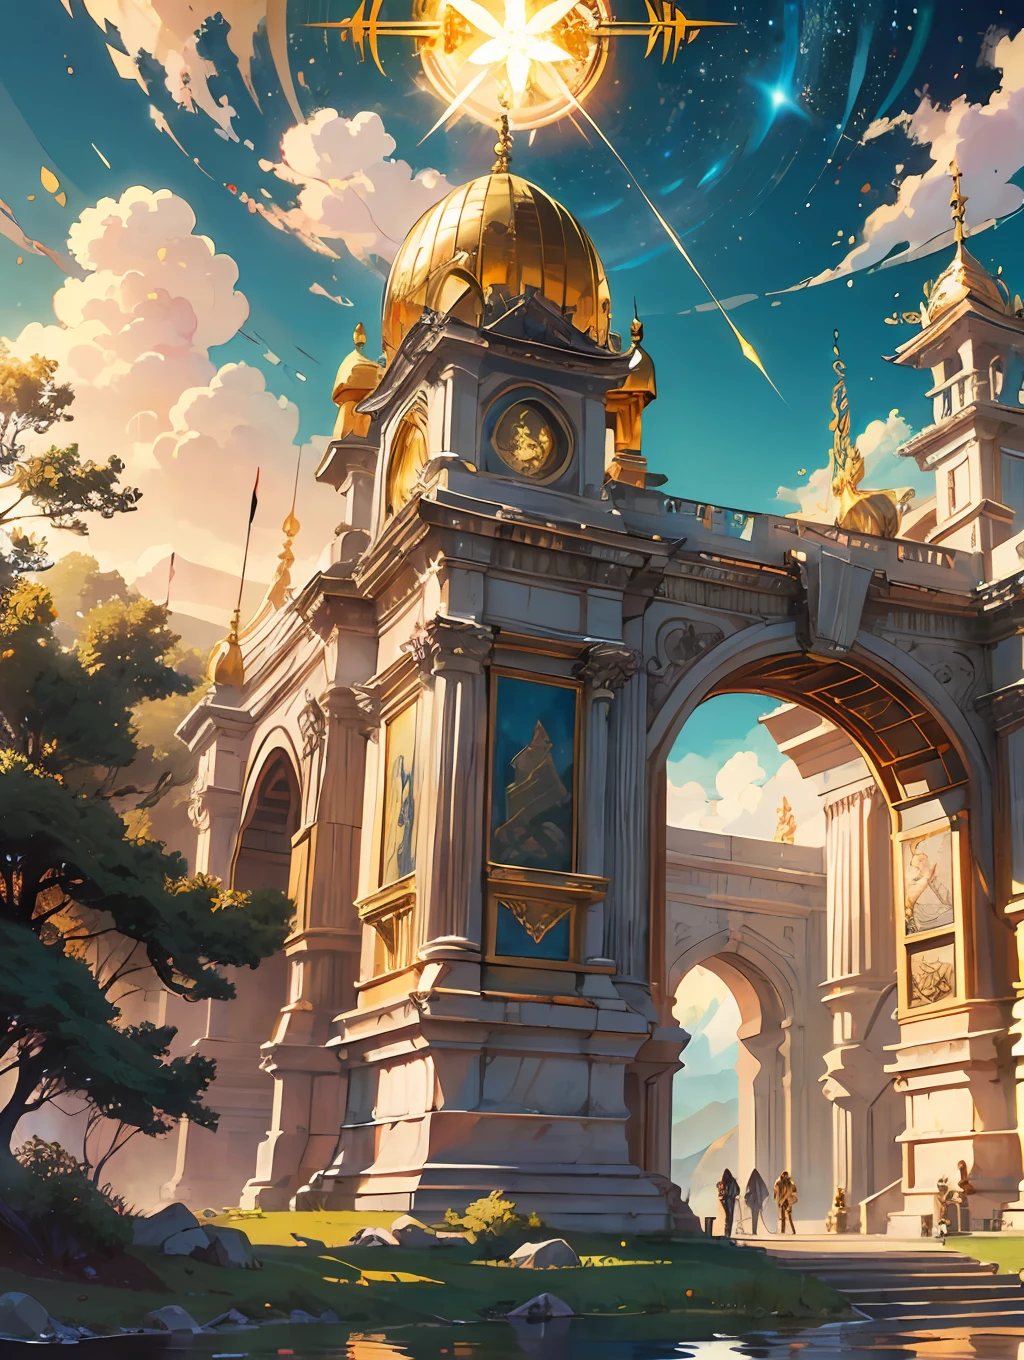 Behold the ((majestic Golden Path of Victory:1.5)), a celestial journey that transcends mortal realms. Bathed in the warm embrace of the golden hour lighting, the landscape radiates with ethereal light, illuminating a path of gilded splendor. The path itself, inspired by the gates of heaven, shimmers with intricate details, adorned with celestial symbols and ornate patterns that speak of triumph and divine inspiration.

As you traverse this fantastical landscape, you witness the grandeur of towering mountains that reach toward the heavens, their peaks kissed by golden sunlight. Soft, billowing clouds painted in hues of gold and amber float gracefully above, as if lifted by heavenly currents. The surrounding flora, drenched in the magical light, boasts vibrant hues of gold and lush greens, further enhancing the sense of otherworldly enchantment.

The camera angle captures the sprawling vista from a wide perspective, showcasing the sweeping majesty of the Golden Path of Victory. The golden hour lighting infuses the scene with a warm, celestial glow, casting long, majestic shadows that dance upon the path. The intricate details of the ornate symbols and patterns are meticulously rendered, allowing each element to come alive and tell its story.

In this fantasy landscape, [there are no anime characters or specific figures], but rather a ((sense of wonder and awe inspired by the heavenly theme)). The Golden Path of Victory beckons all who dare to tread upon it, offering a glimpse of divine triumph and the promise of celestial glory